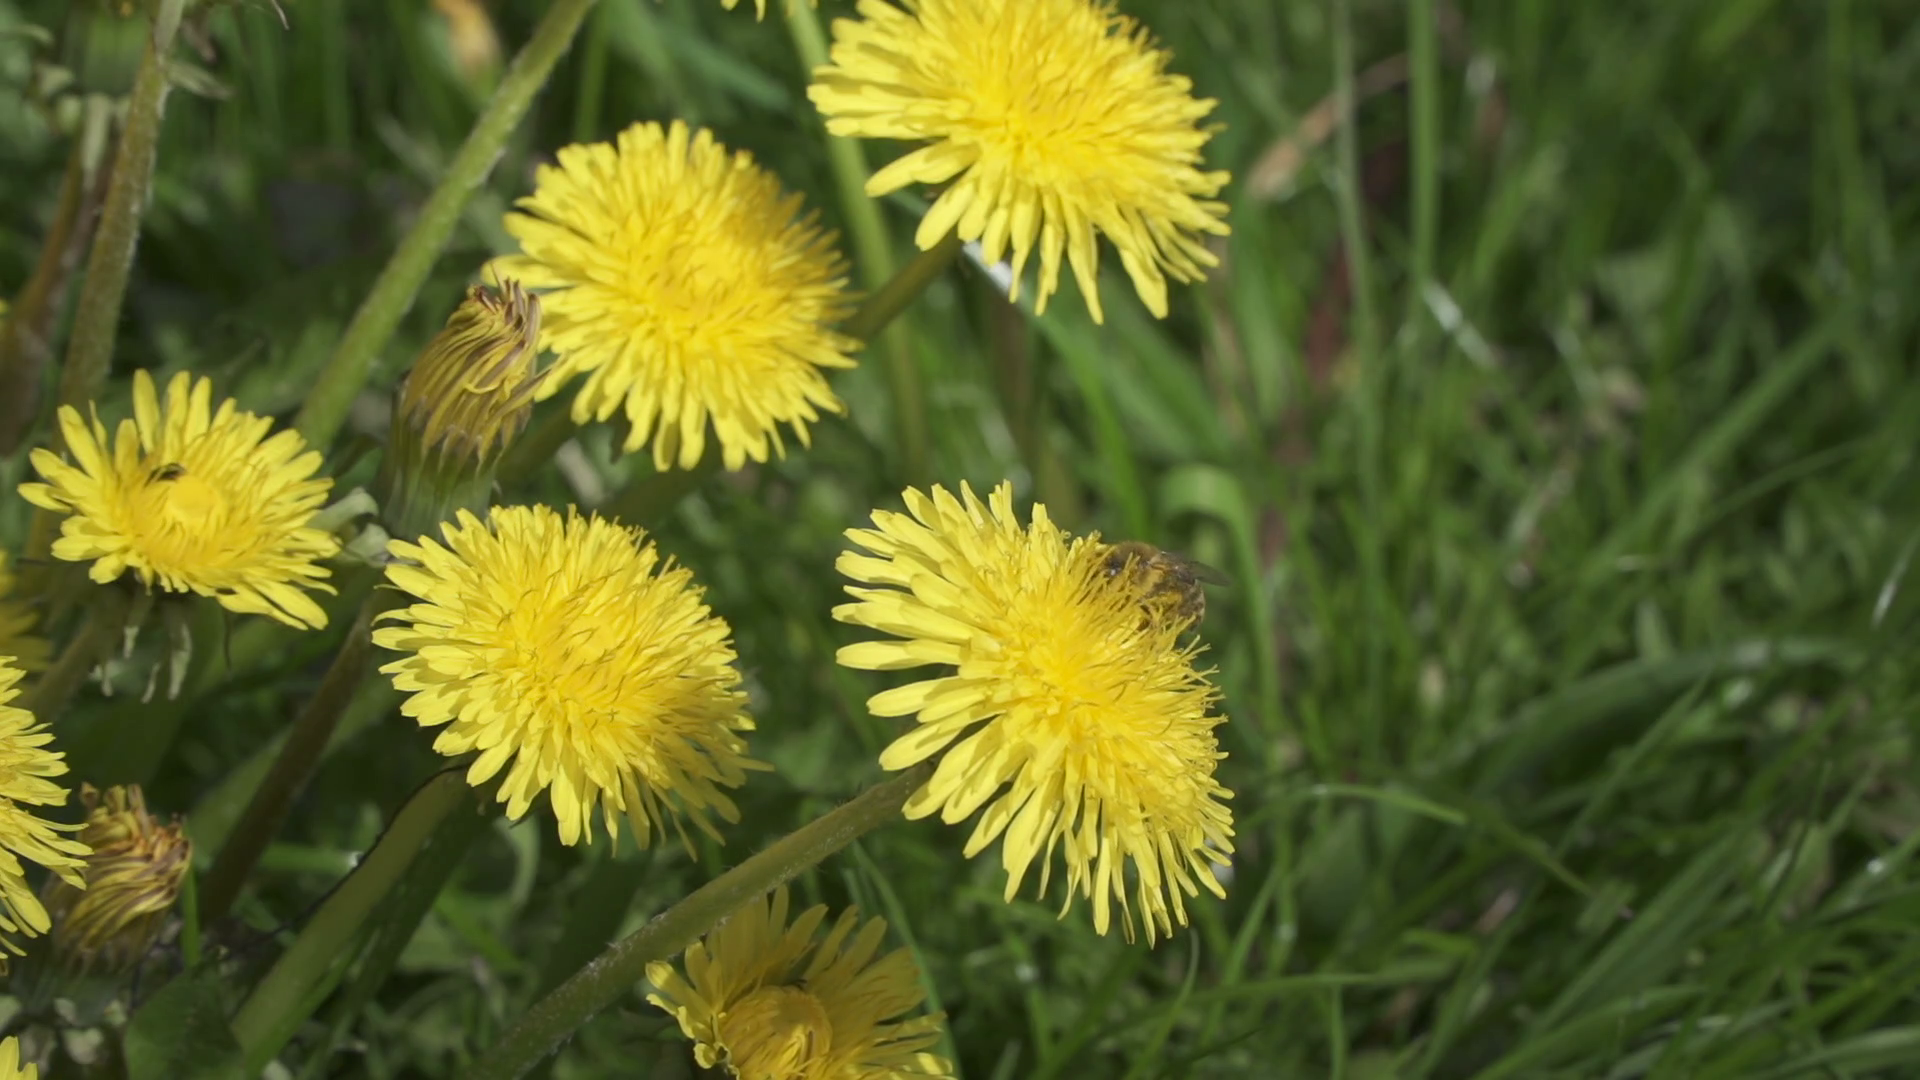 A European honey bee collects nectar from Dandelions Taraxacum in ...